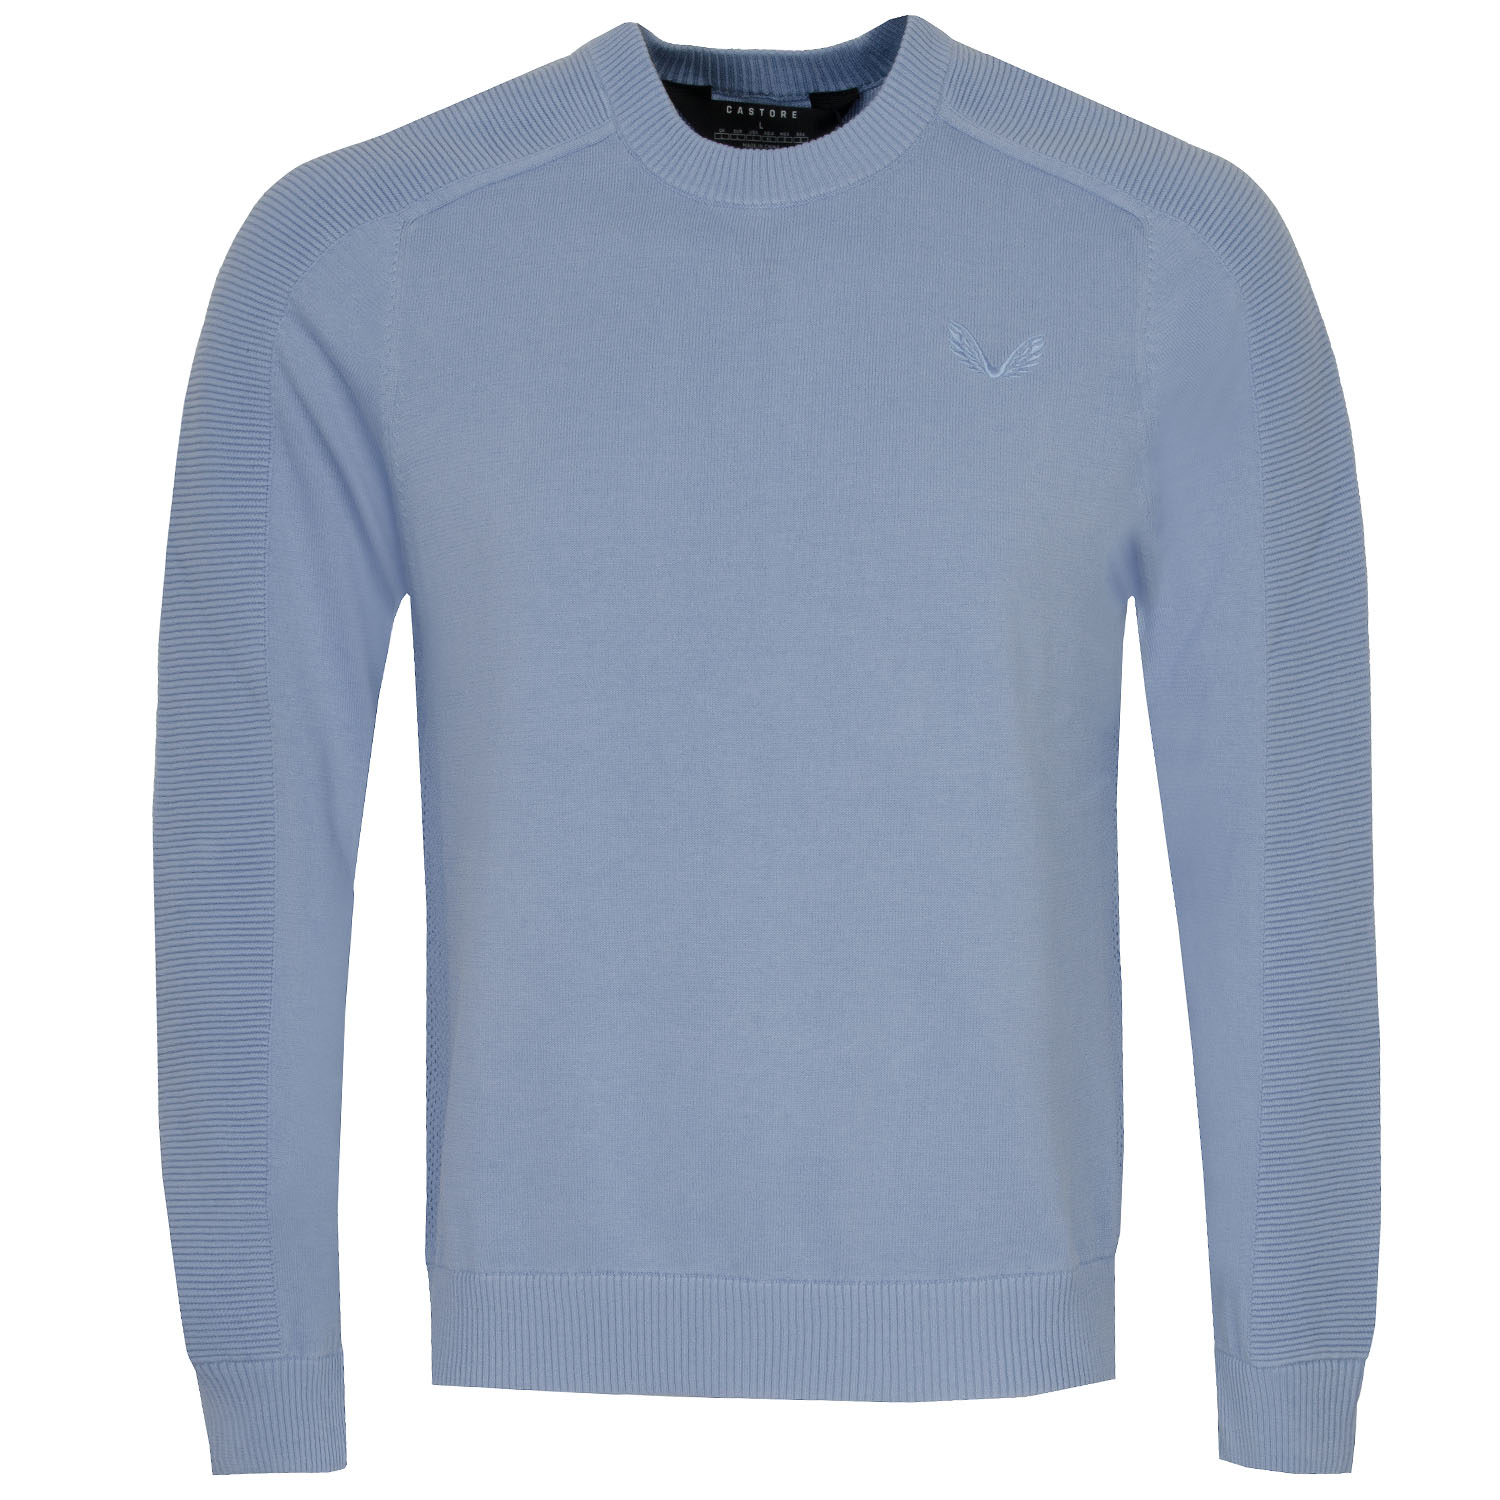 Image of Castore Knitted Crew Neck Sweater